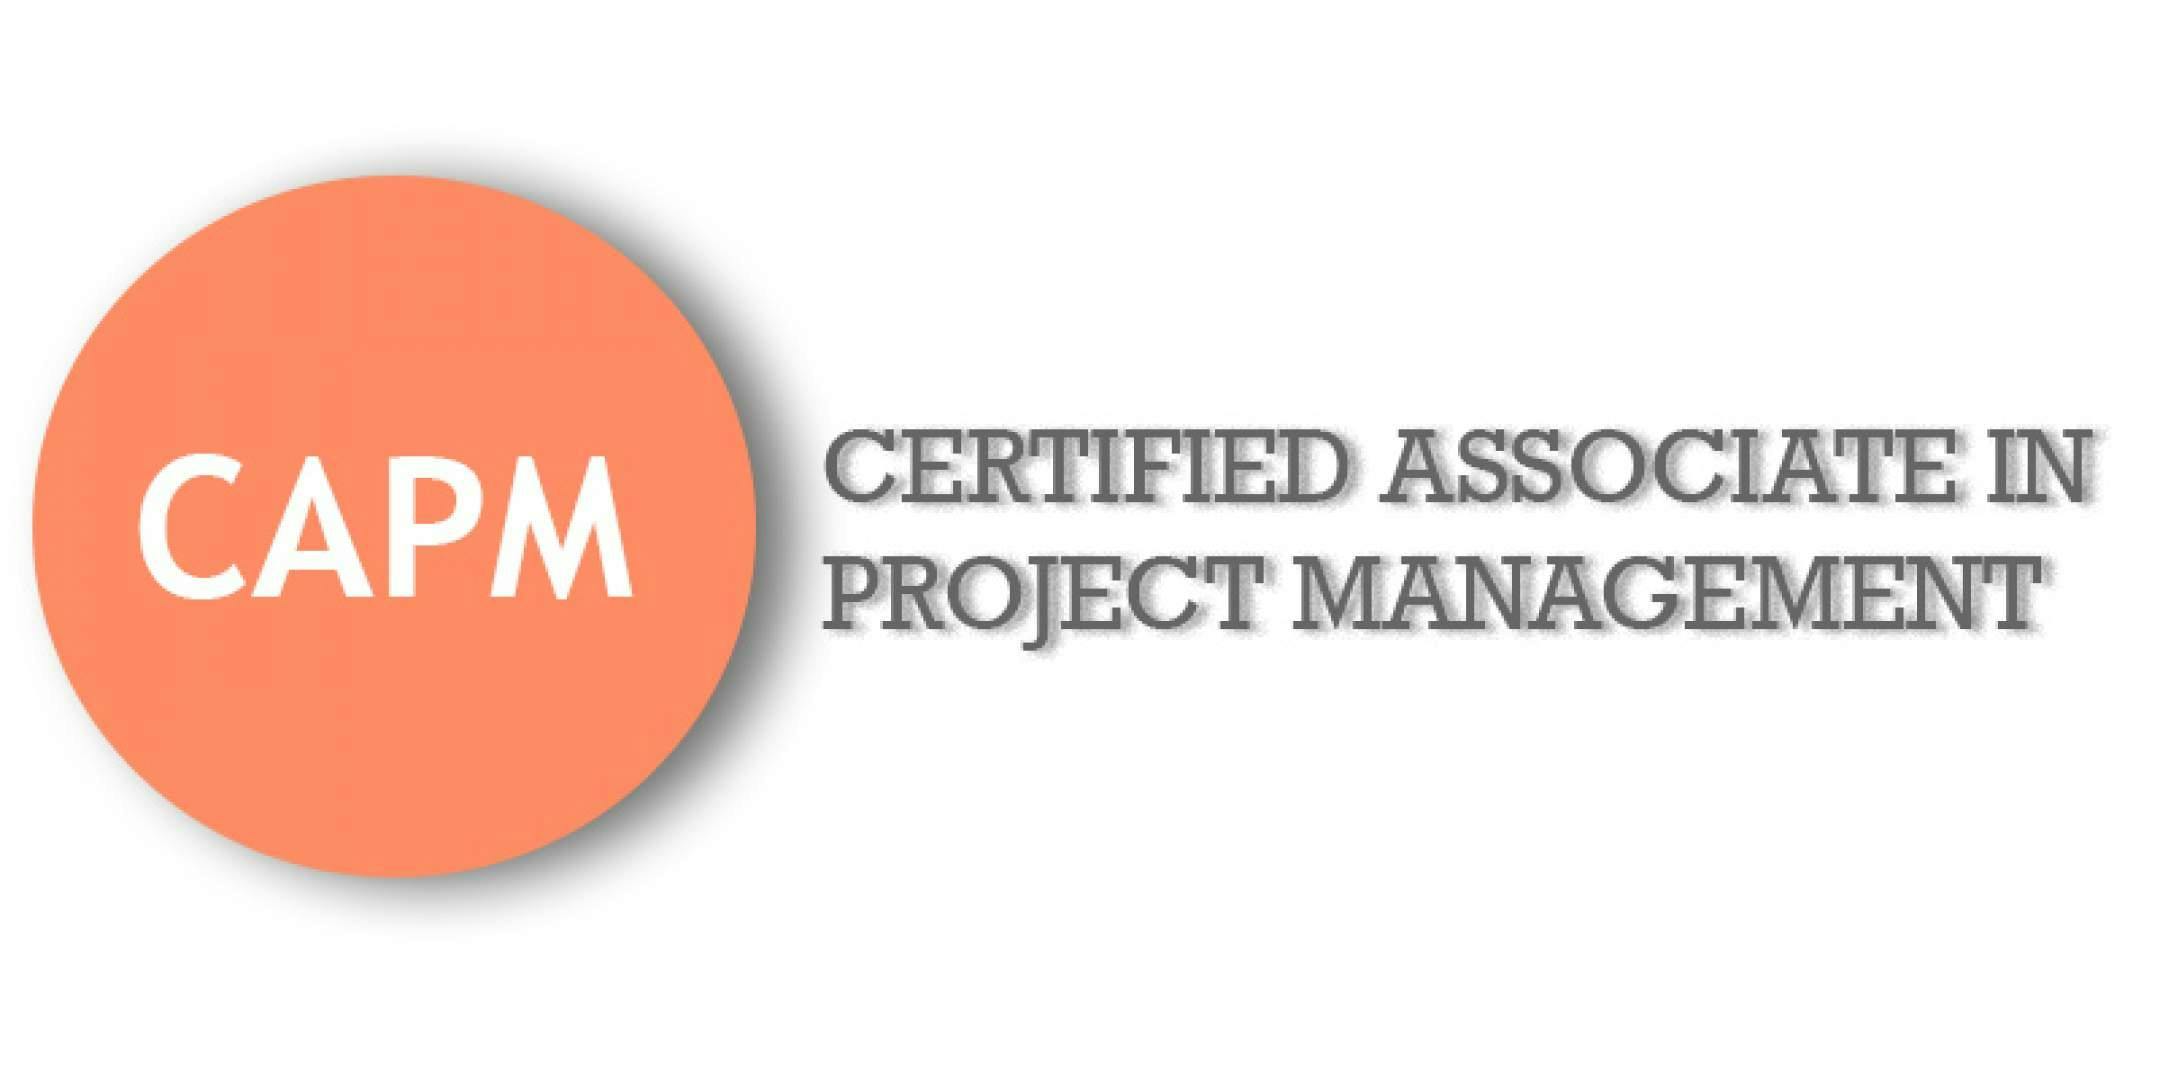 CAPM (Certified Associate In Project Management) Training in Memphis, TN